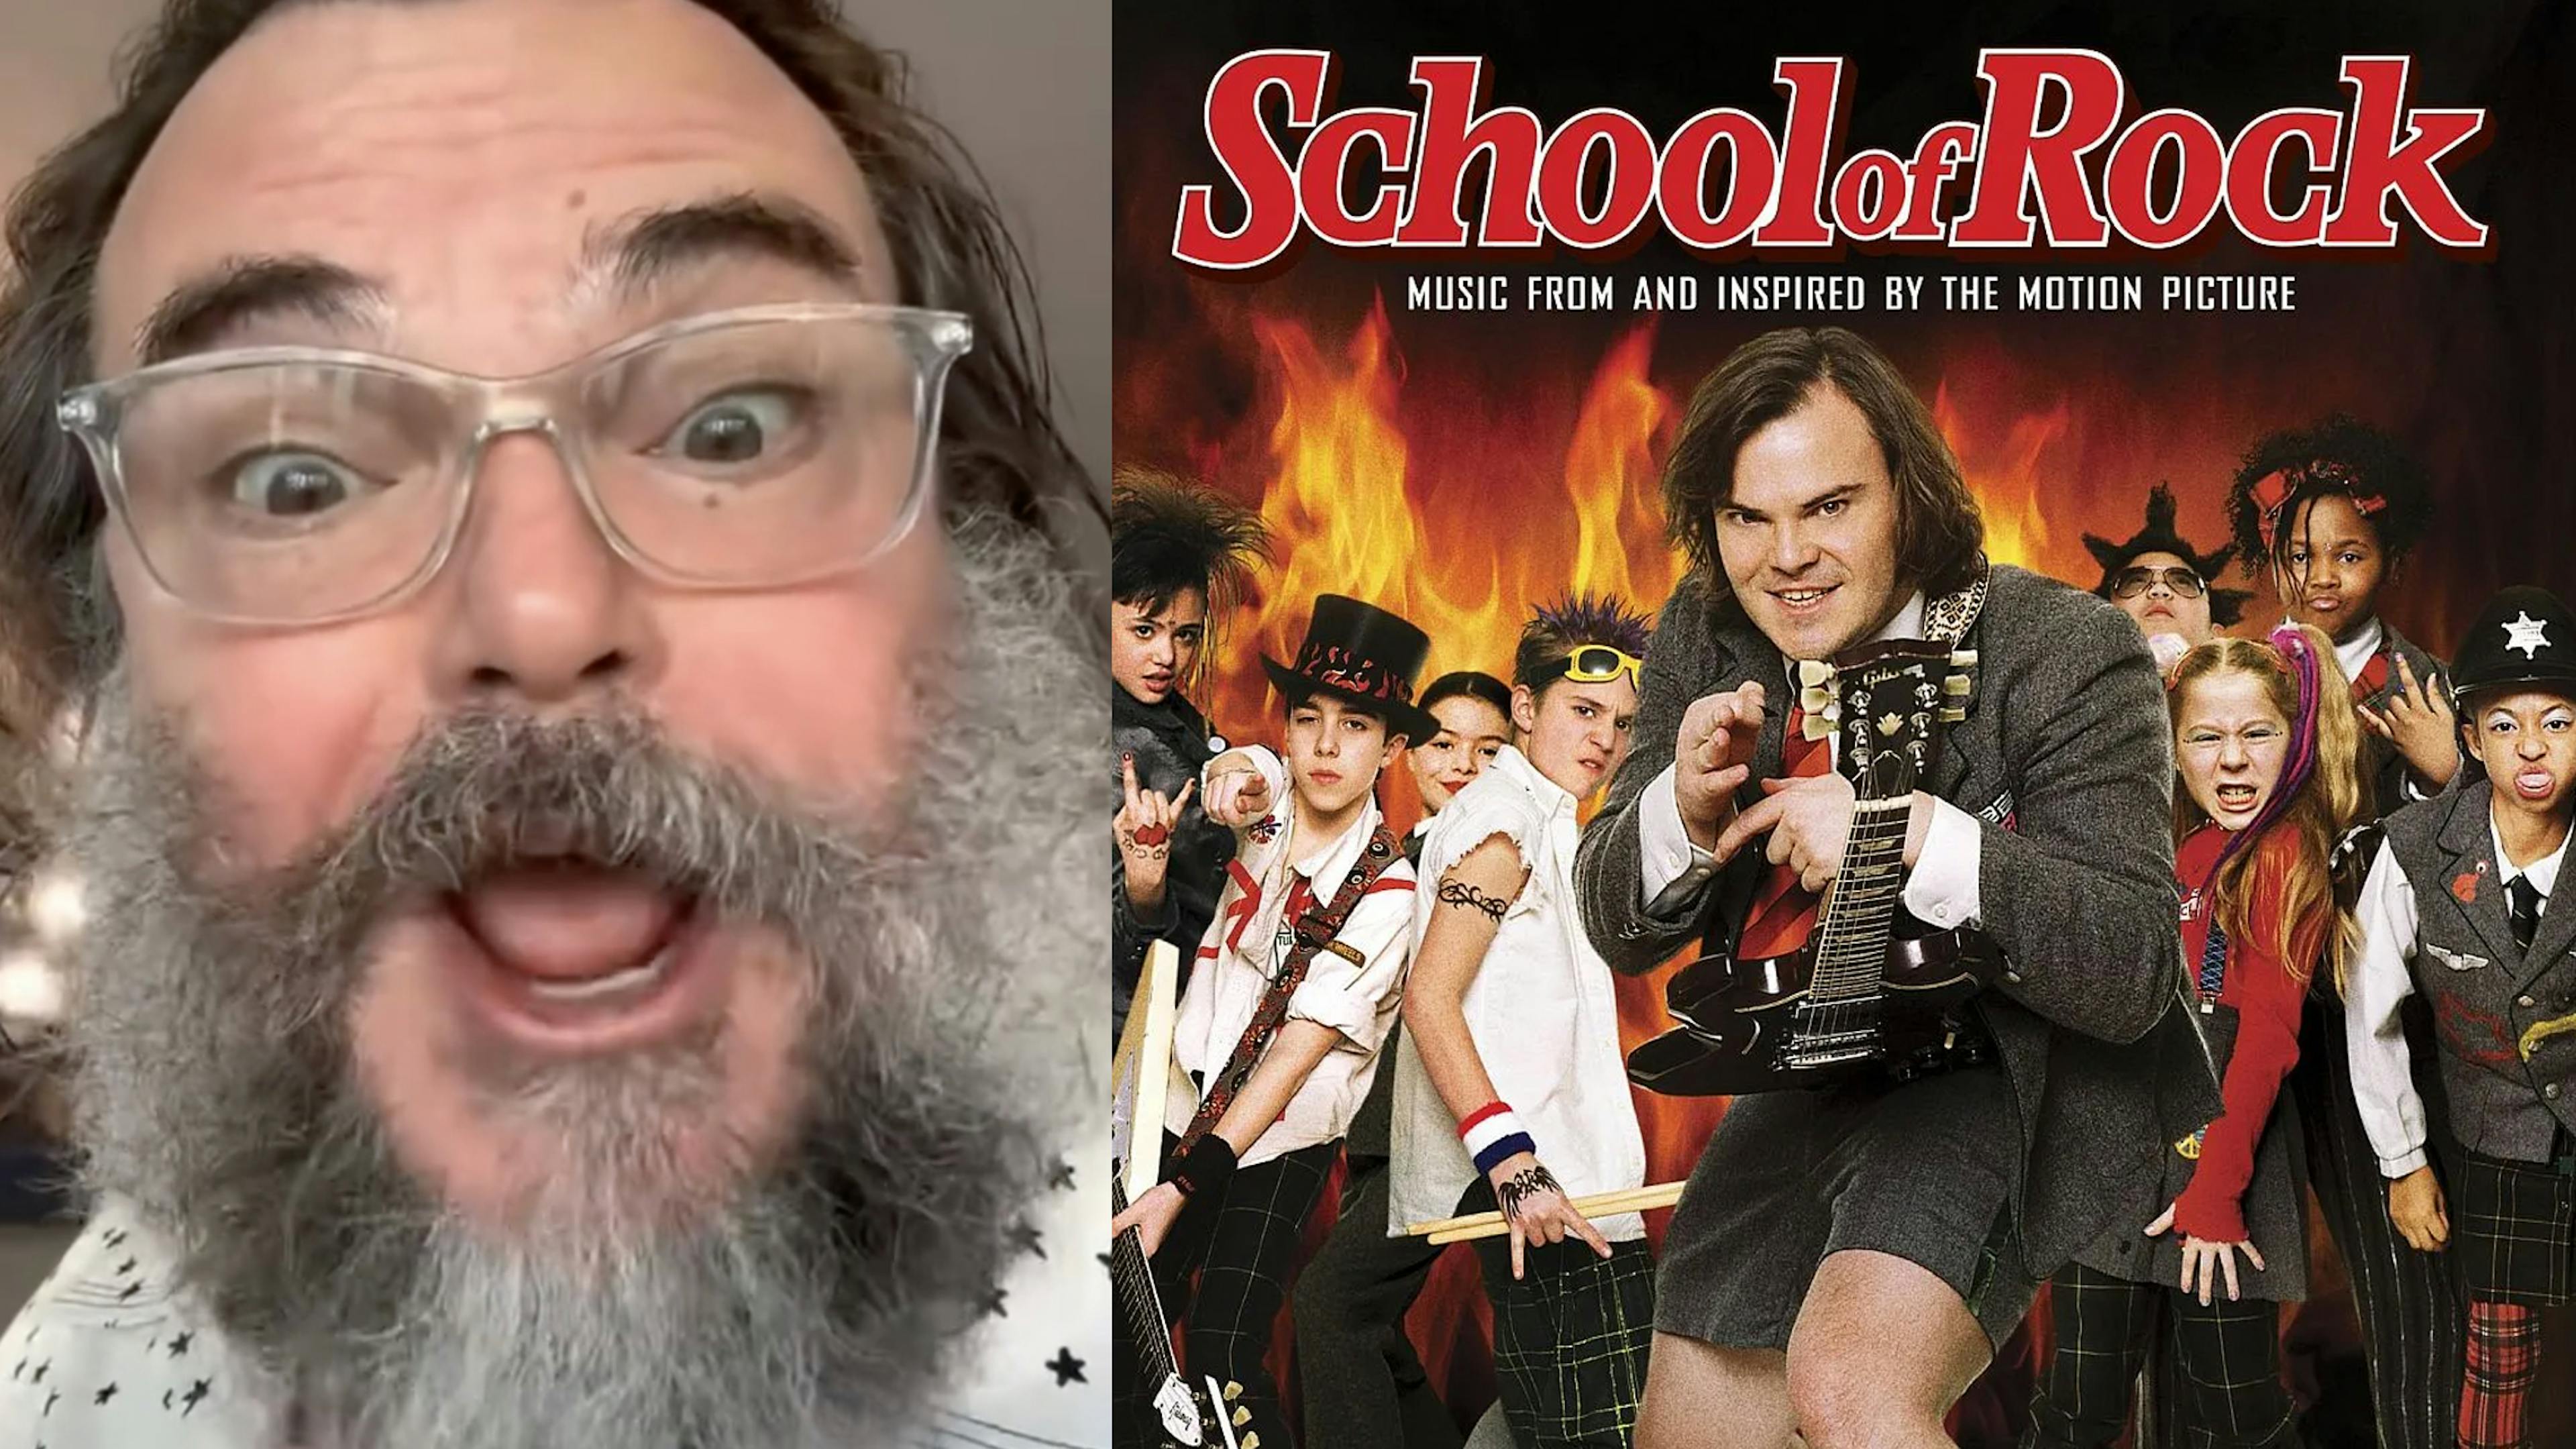 You can now listen to the original ﻿School Of Rock soundtrack on streaming